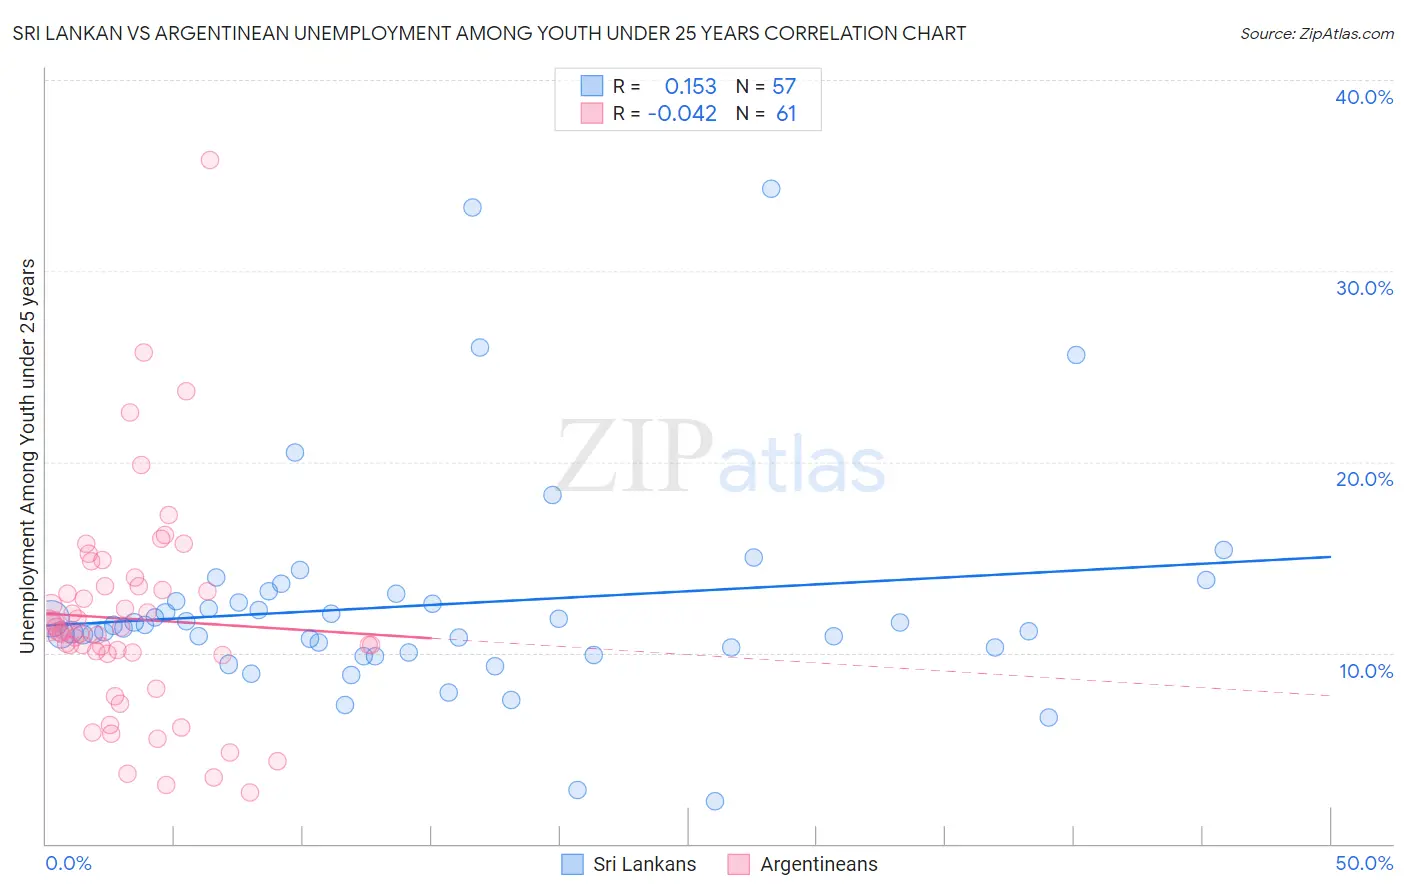 Sri Lankan vs Argentinean Unemployment Among Youth under 25 years